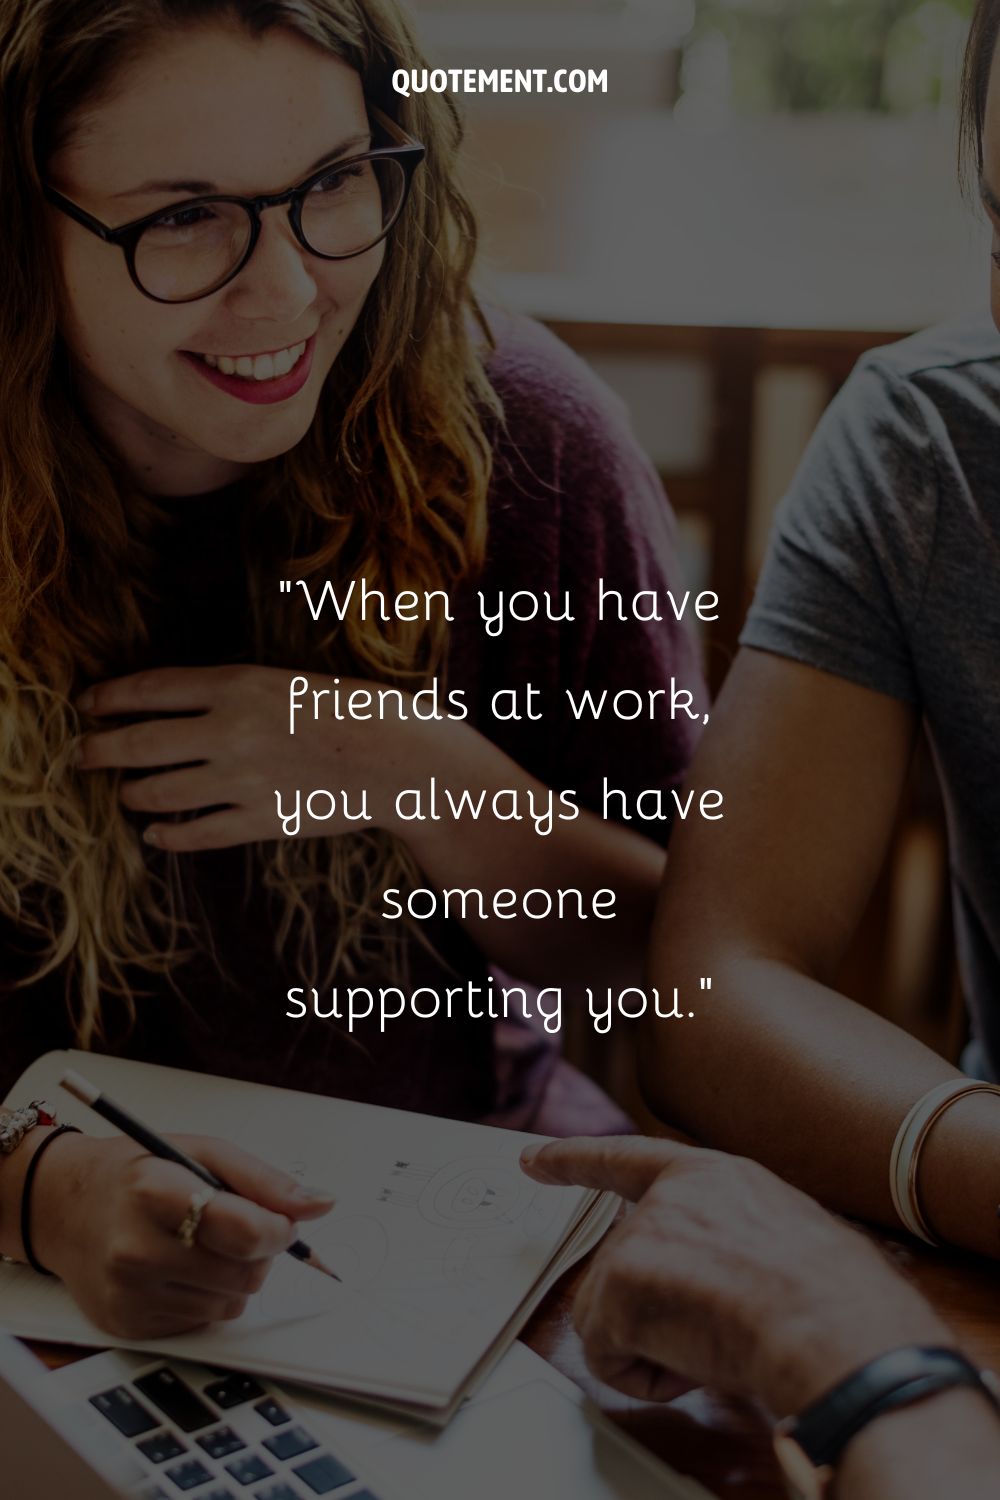 a girl with glasses smiling at work representing friend colleague quote
